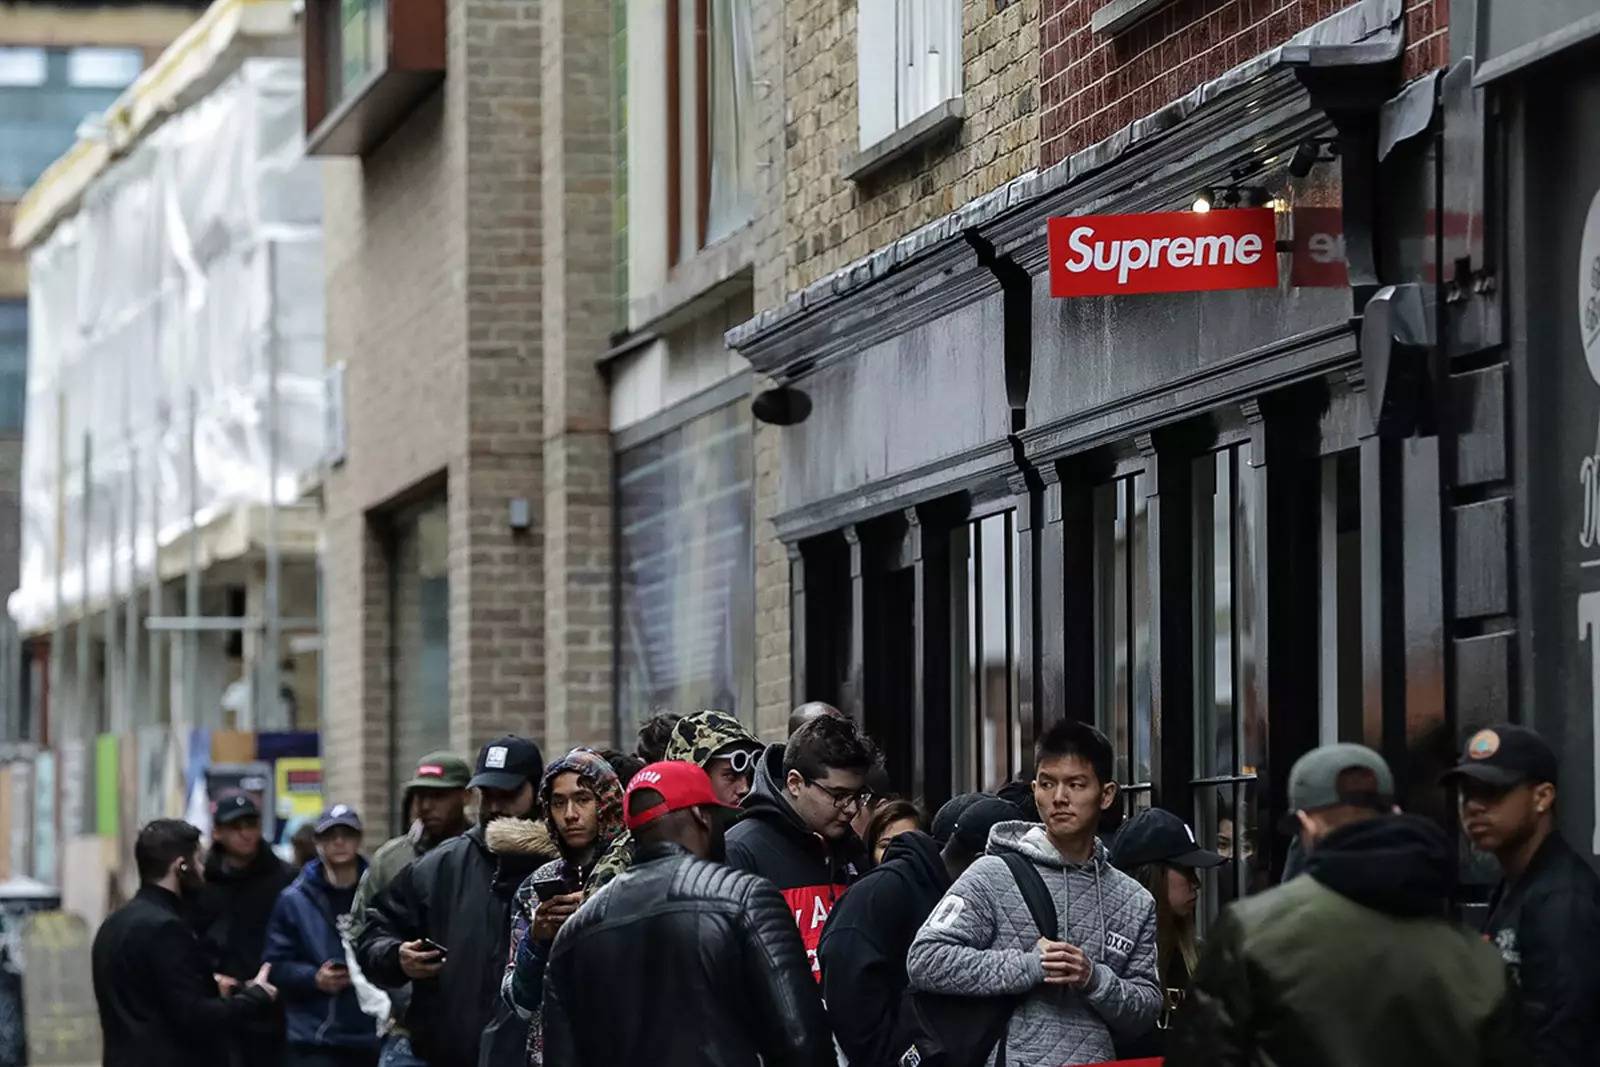 Supreme, and the Botmakers Who Rule the Obsessive World of Streetwear